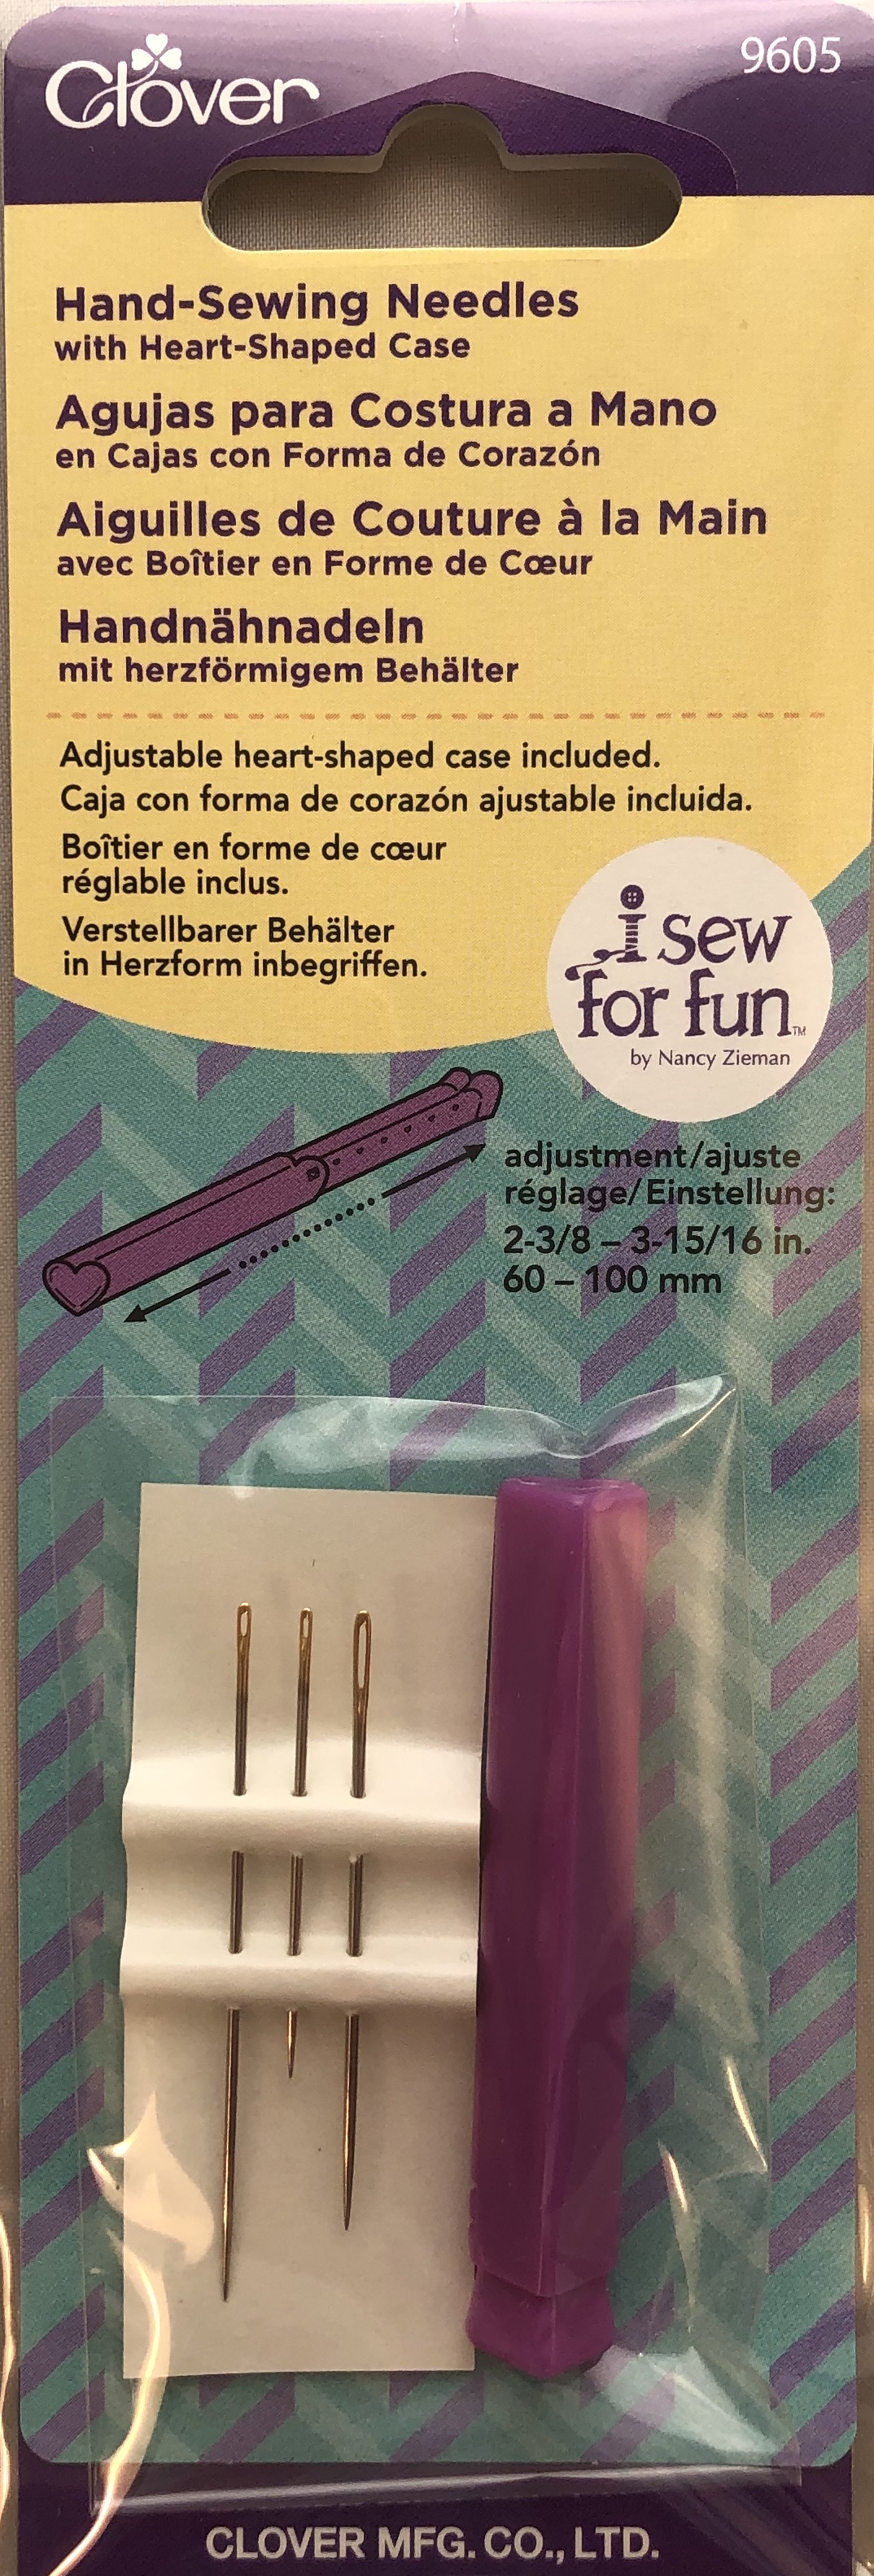 Hand-Sewing Needles with Heart-Shaped Case